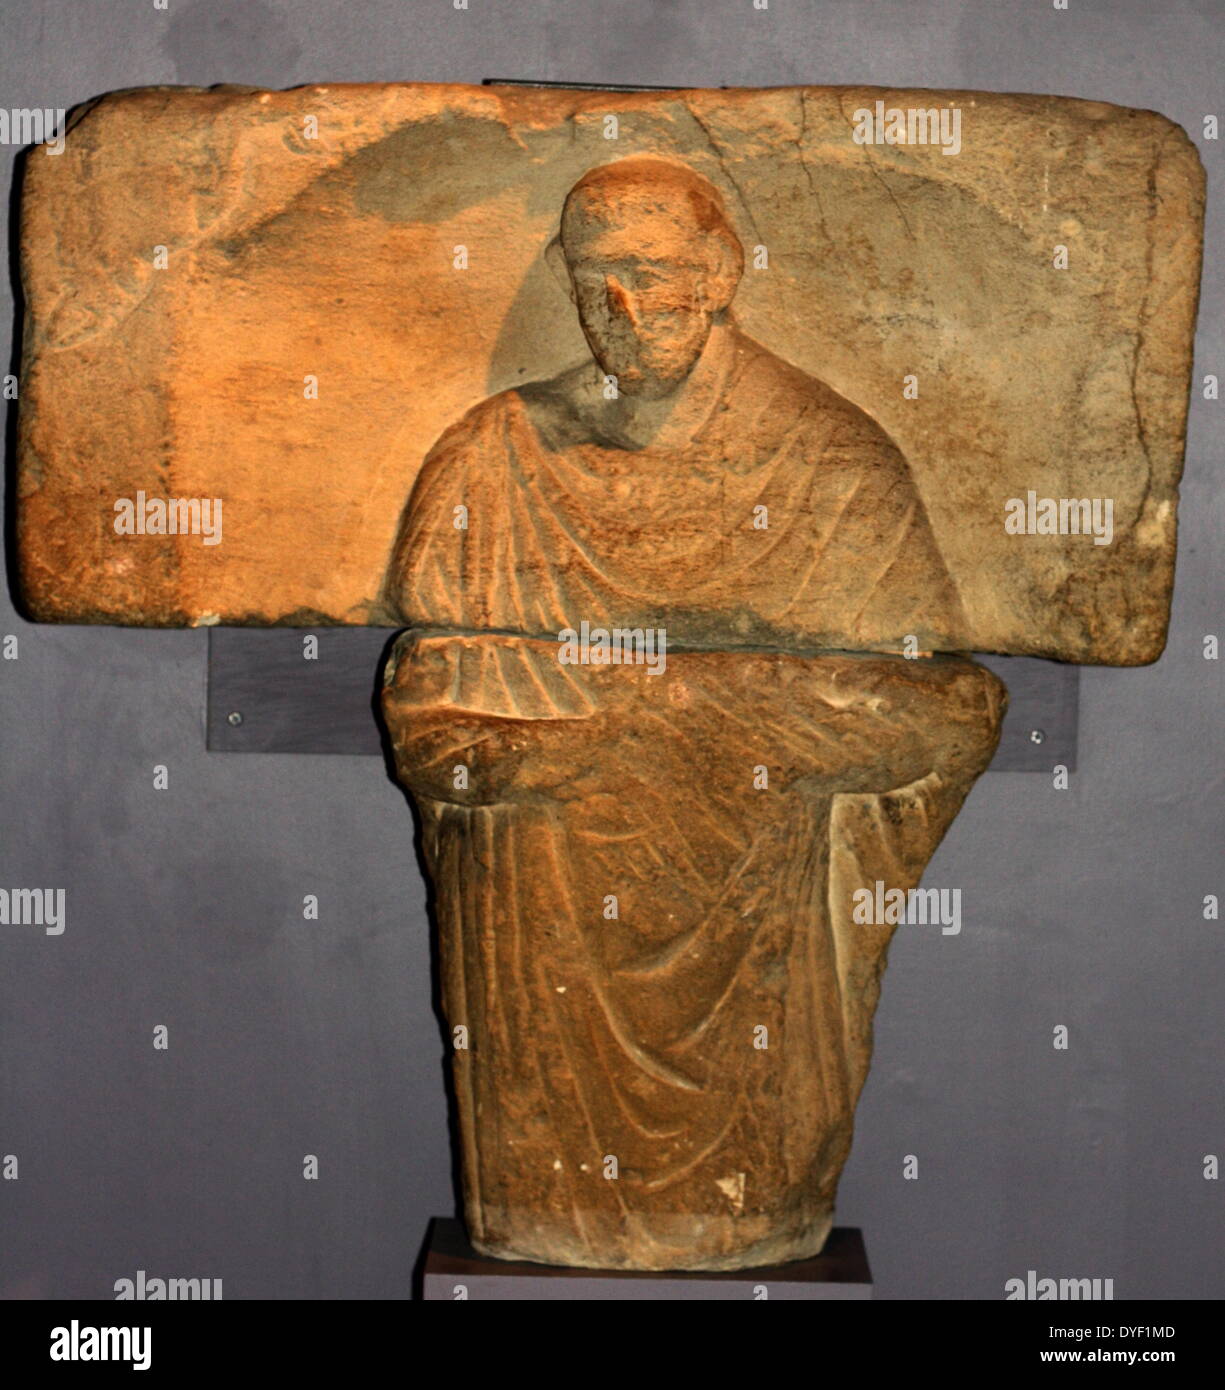 The gravestone of a man from Aquae Sulis. The tombstone is a relief image showing him how he wished to be remembered. With a scroll, reflecting his learning and status. It was re-used in the medieval town wall. Circa 1st-3rd century AD. Roman. Stock Photo